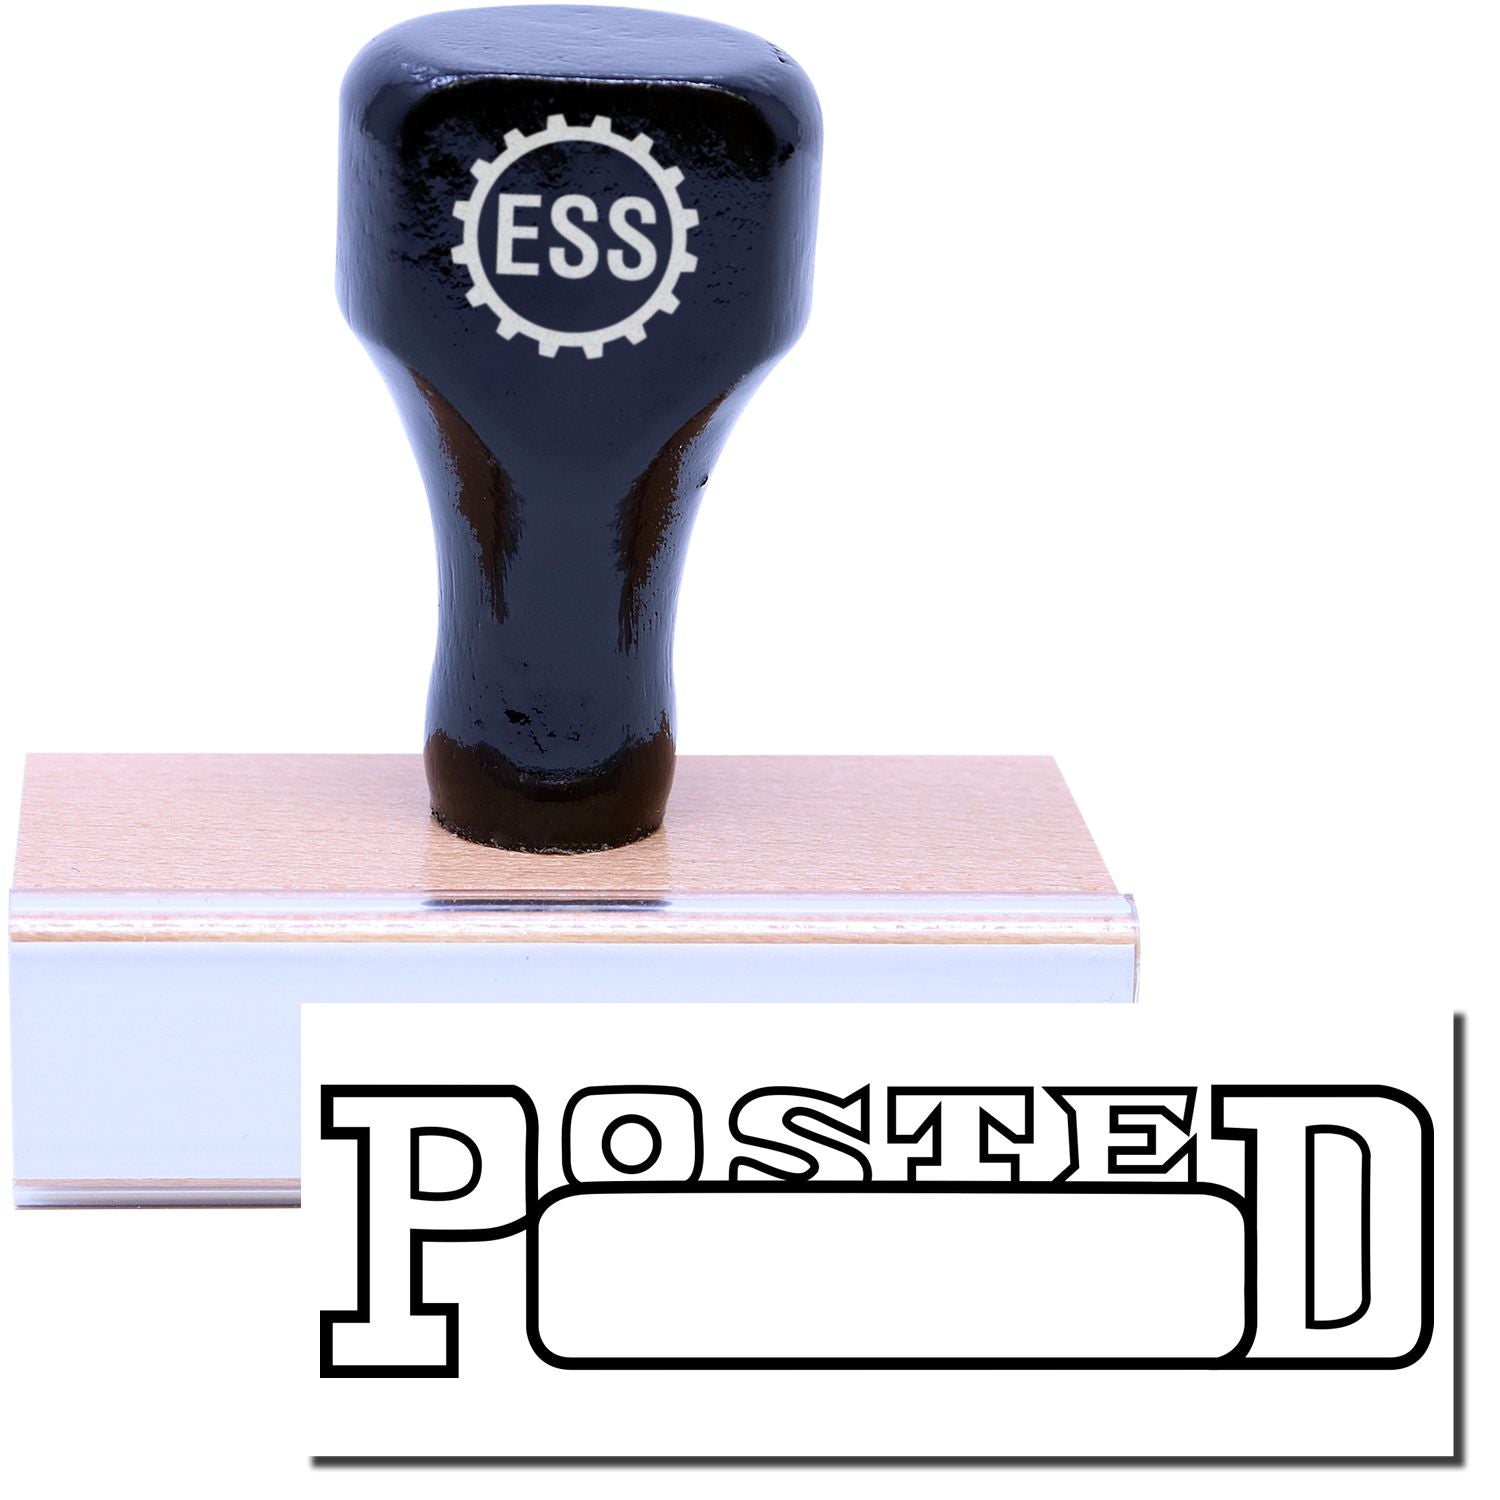 A stock office rubber stamp with a stamped image showing how the text "POSTED" in a large outline font with a date box is displayed after stamping.